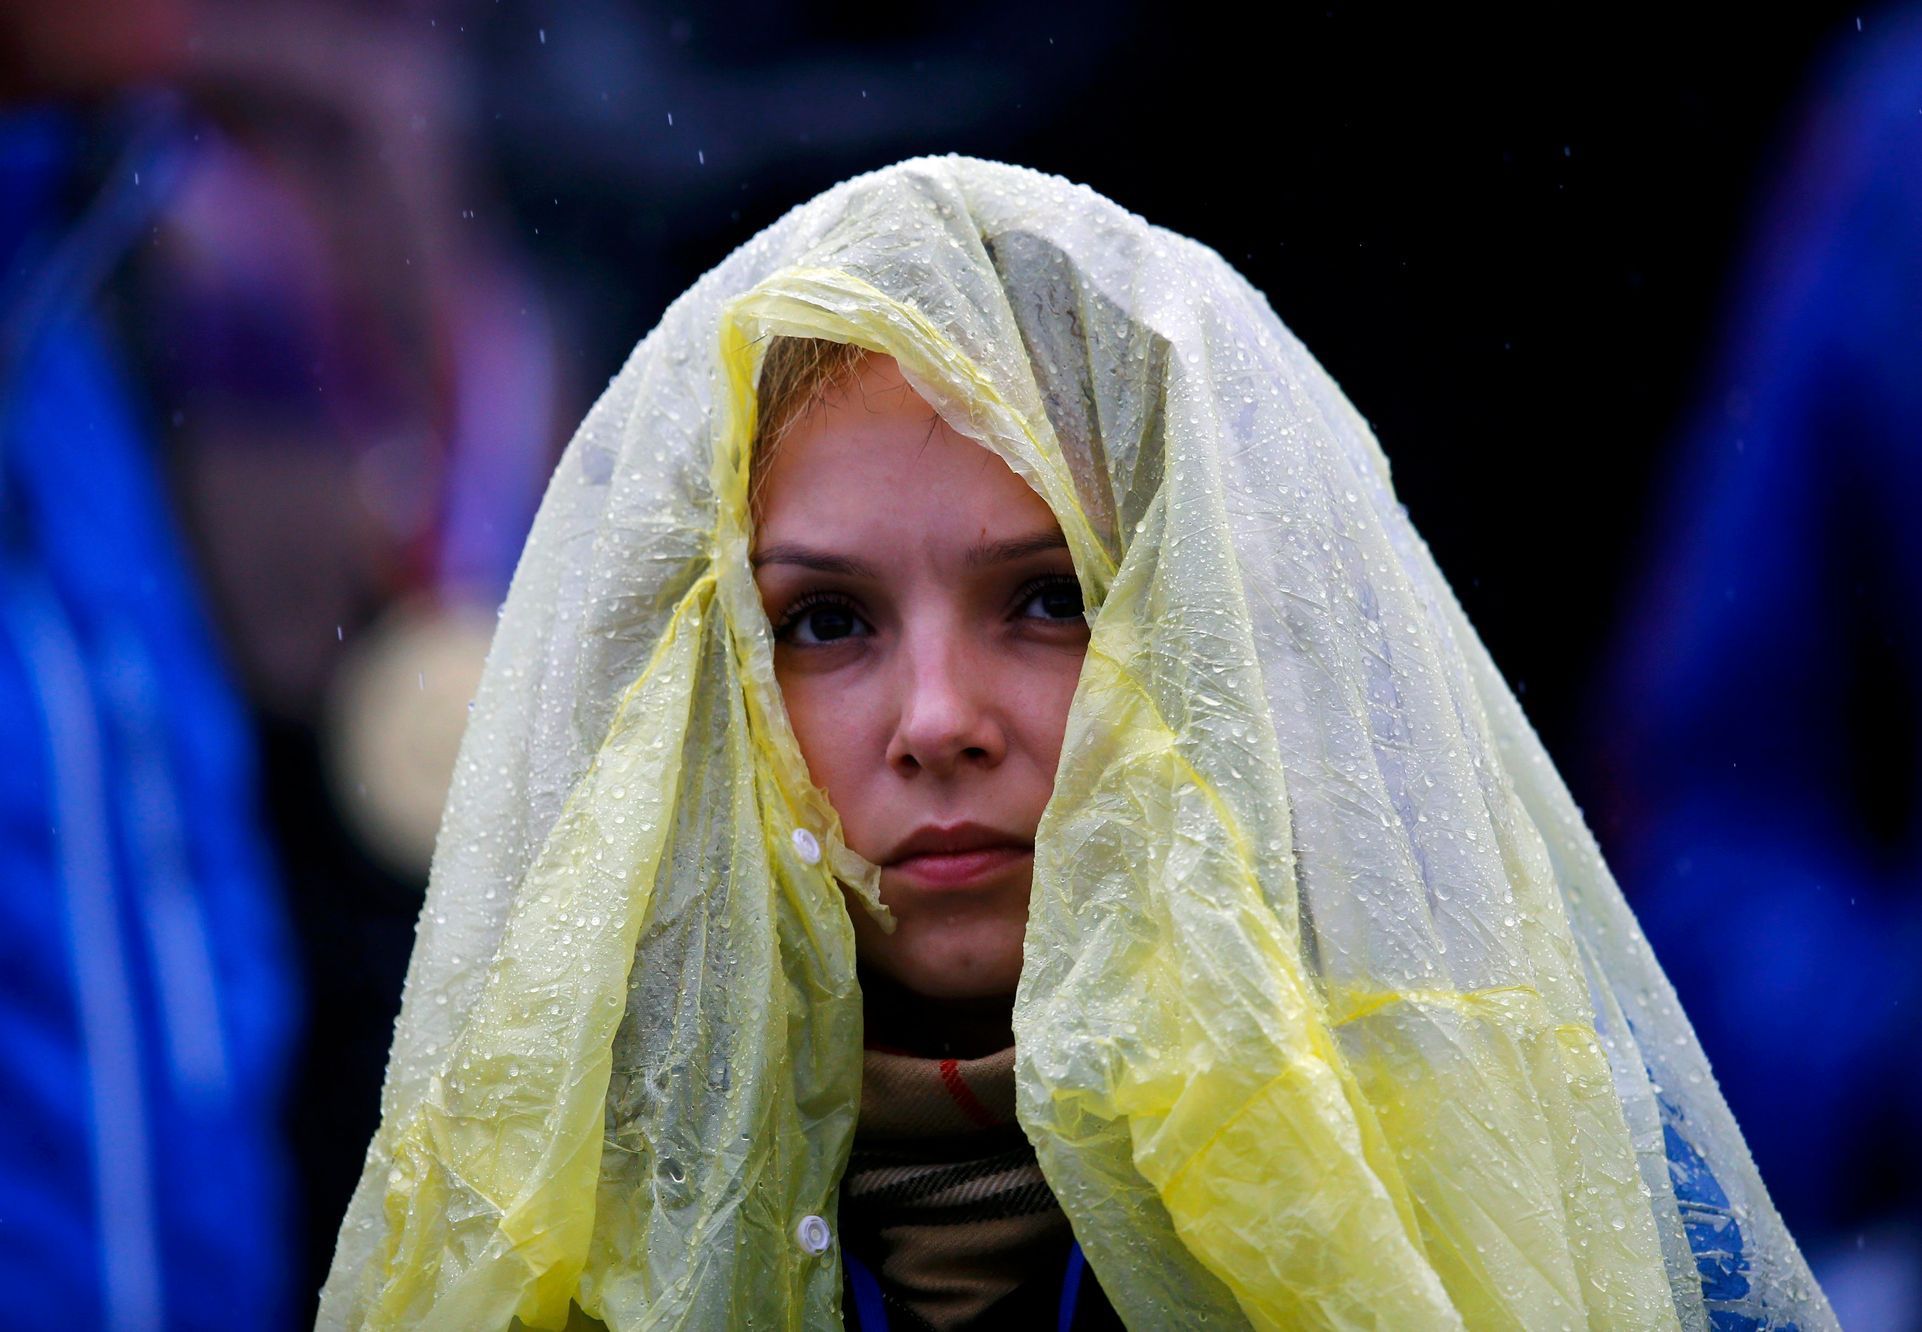 A spectator uses a raincover to protect herself from rain as she waits for the start of second run of the women's alpine skiing giant slalom event during the 2014 Sochi Winter Olympics at the Rosa Khu